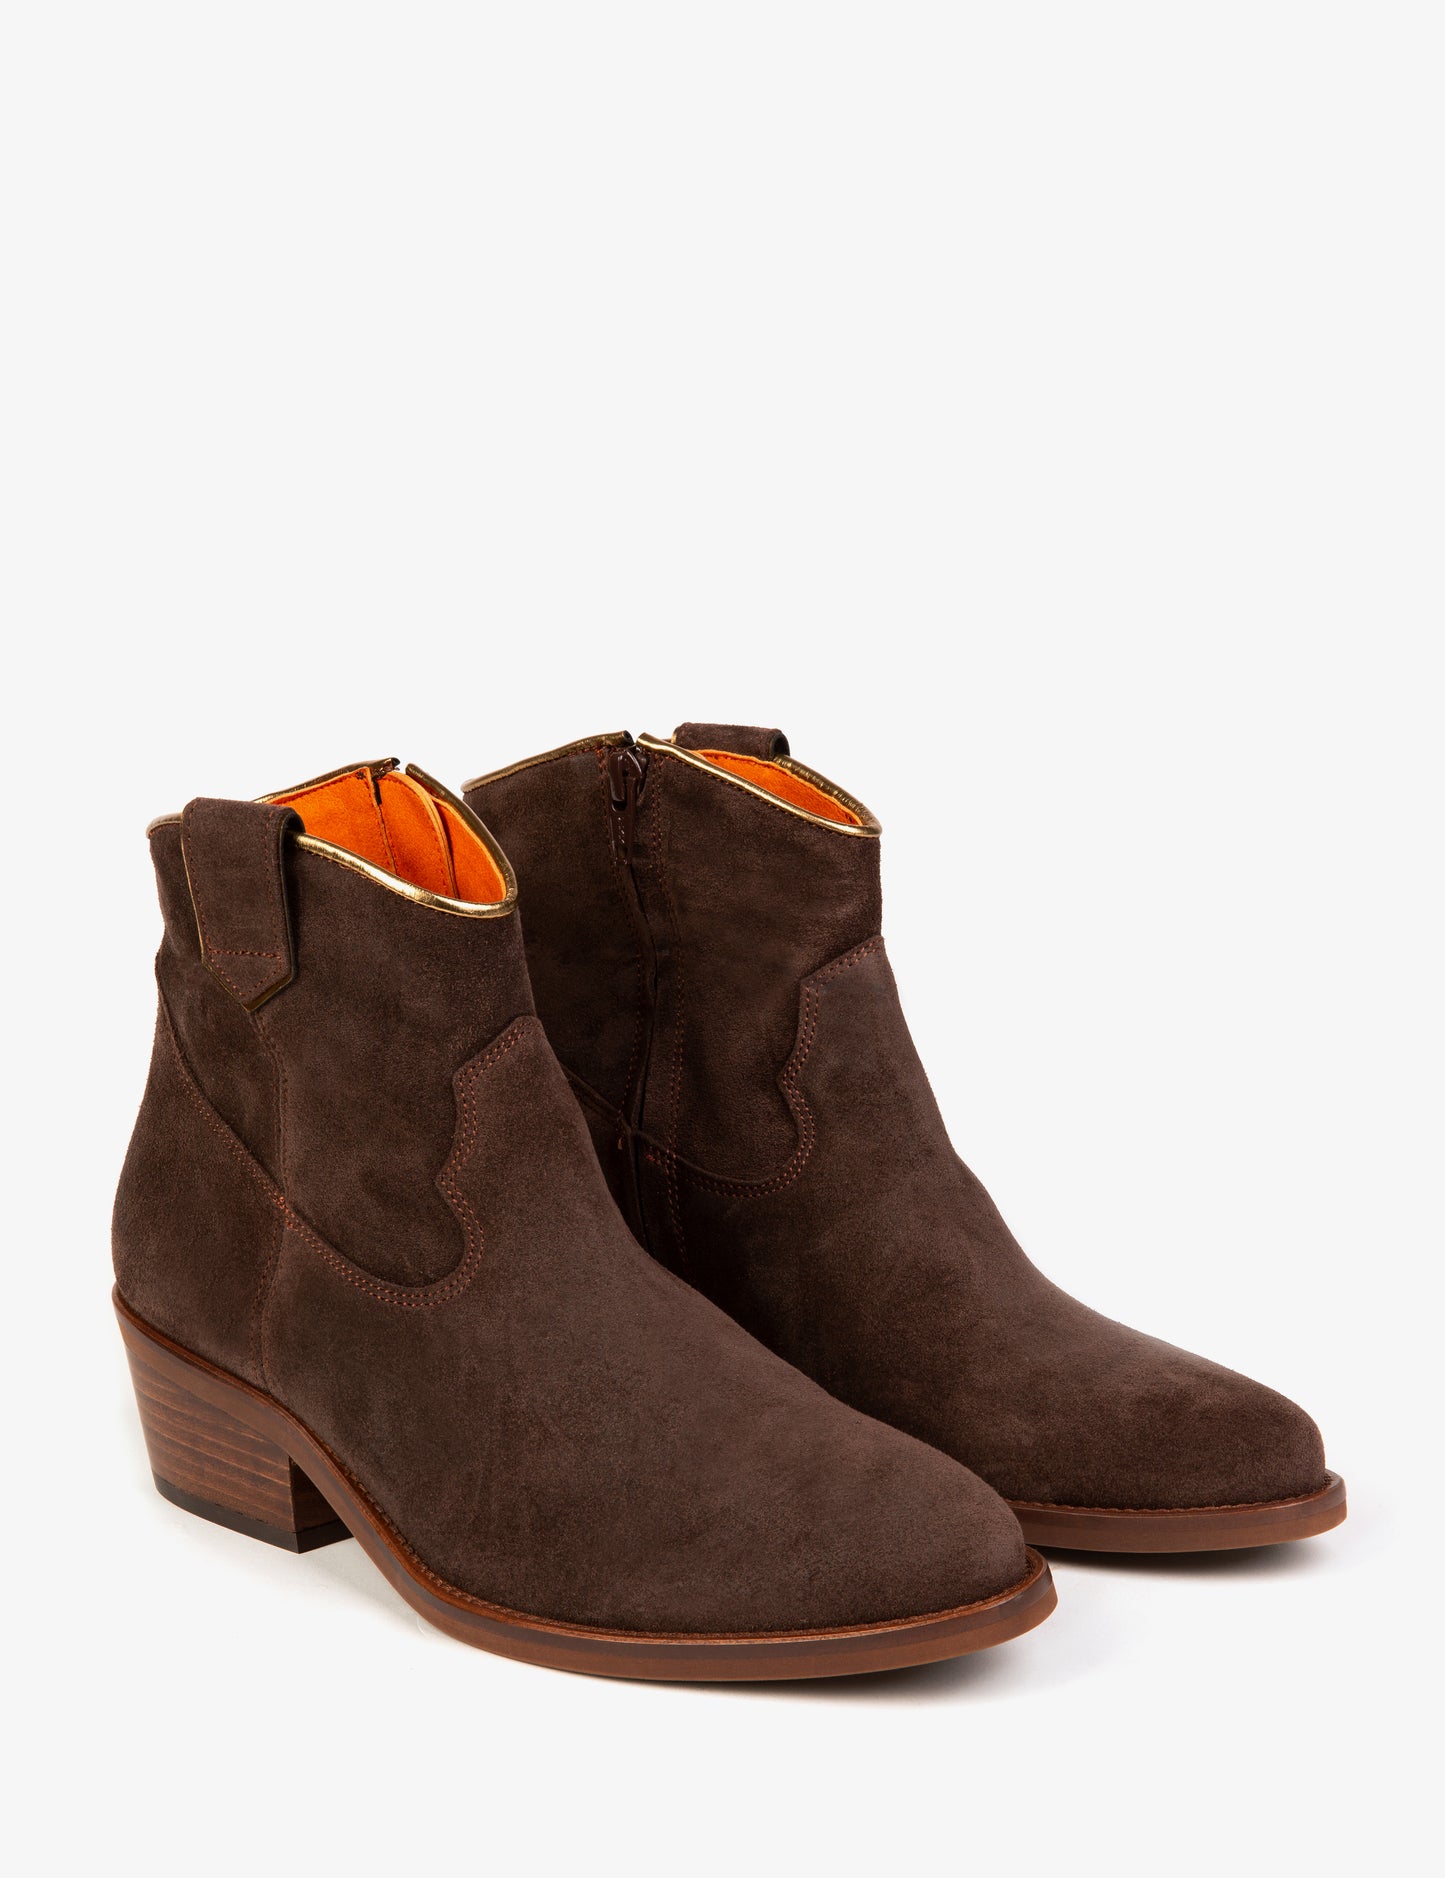 'Cassidy'  Bitter Chocolate Suede